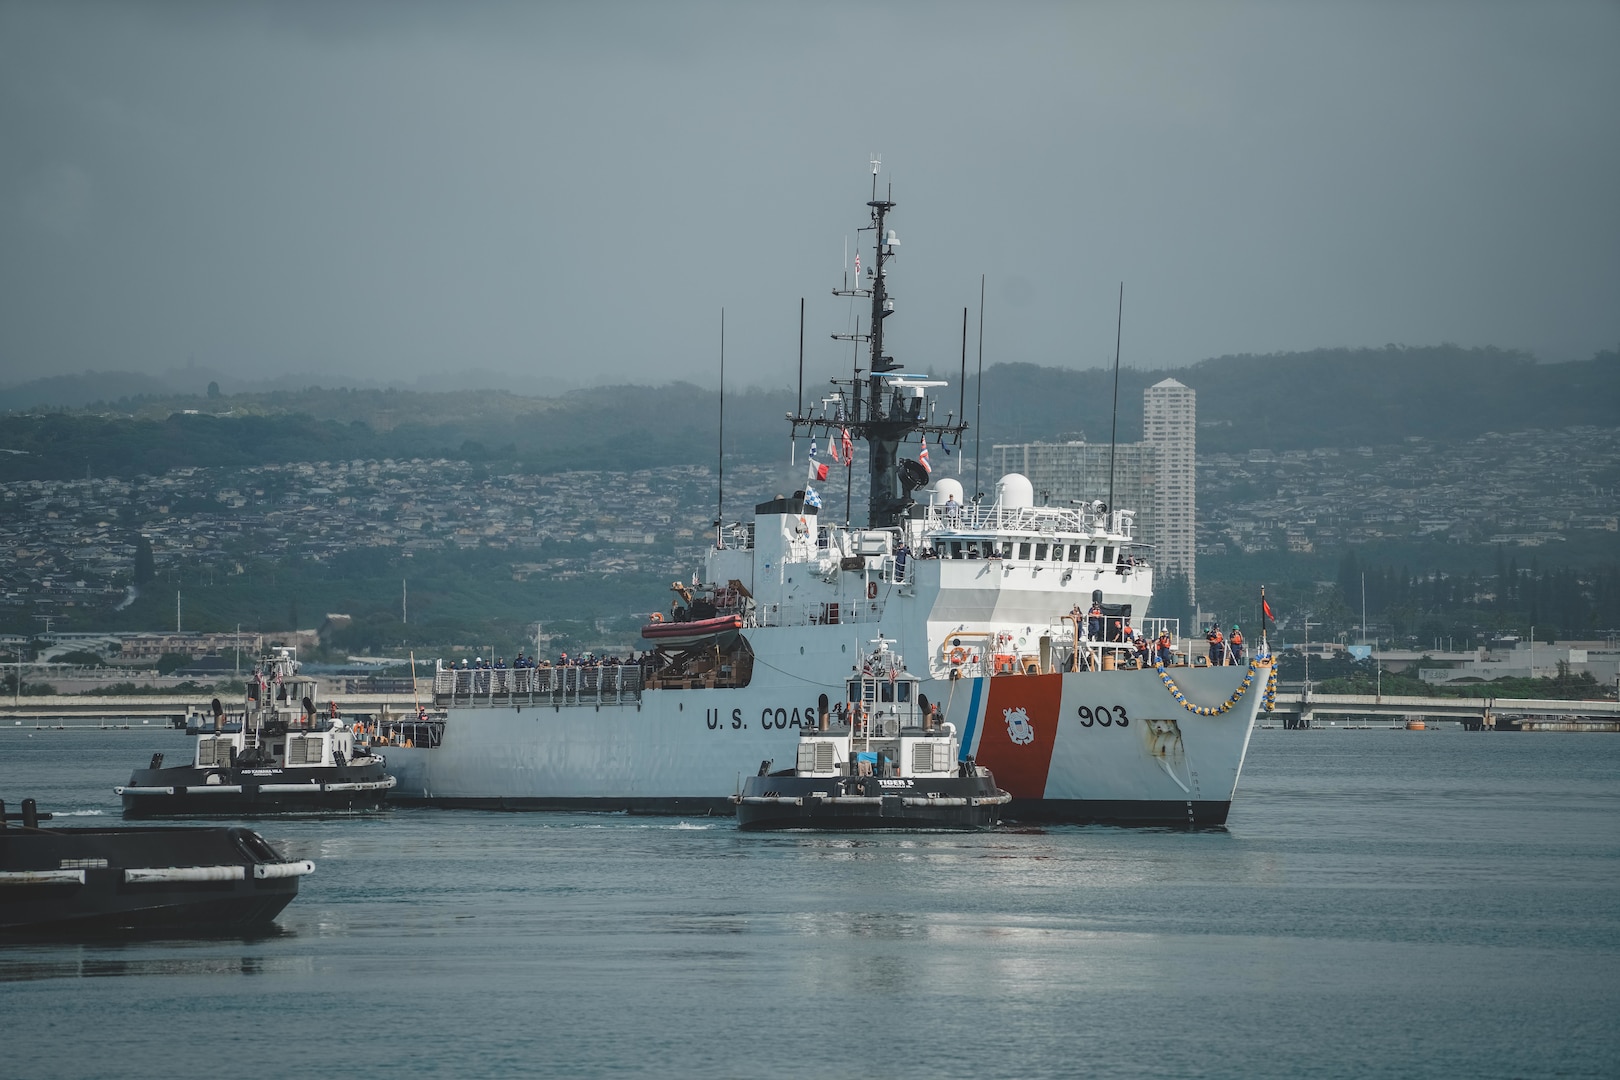 U.S. Coast Guard Cutter Harriet Lane (WMEC 903) and crew arrive at its new homeport at Pearl Harbor, Dec. 14, 2023, after transiting more than 9,440 miles over 35-days from Portsmouth, Virginia. The Harriet Lane is U.S. Coast Guard Pacific Area’s newest Indo-Pacific support cutter and spent more than 15 months in a Service Life Extension Program (SLEP) in Baltimore, Maryland, to prepare for the transition in missions and operations. Following reconstitution of the crew in July and returning to Portsmouth in August, the crew went through an extensive dockside period, ensuring the cutter was ready for the transit from the Atlantic Ocean to the Pacific Ocean. (U.S. Coast Guard photo)